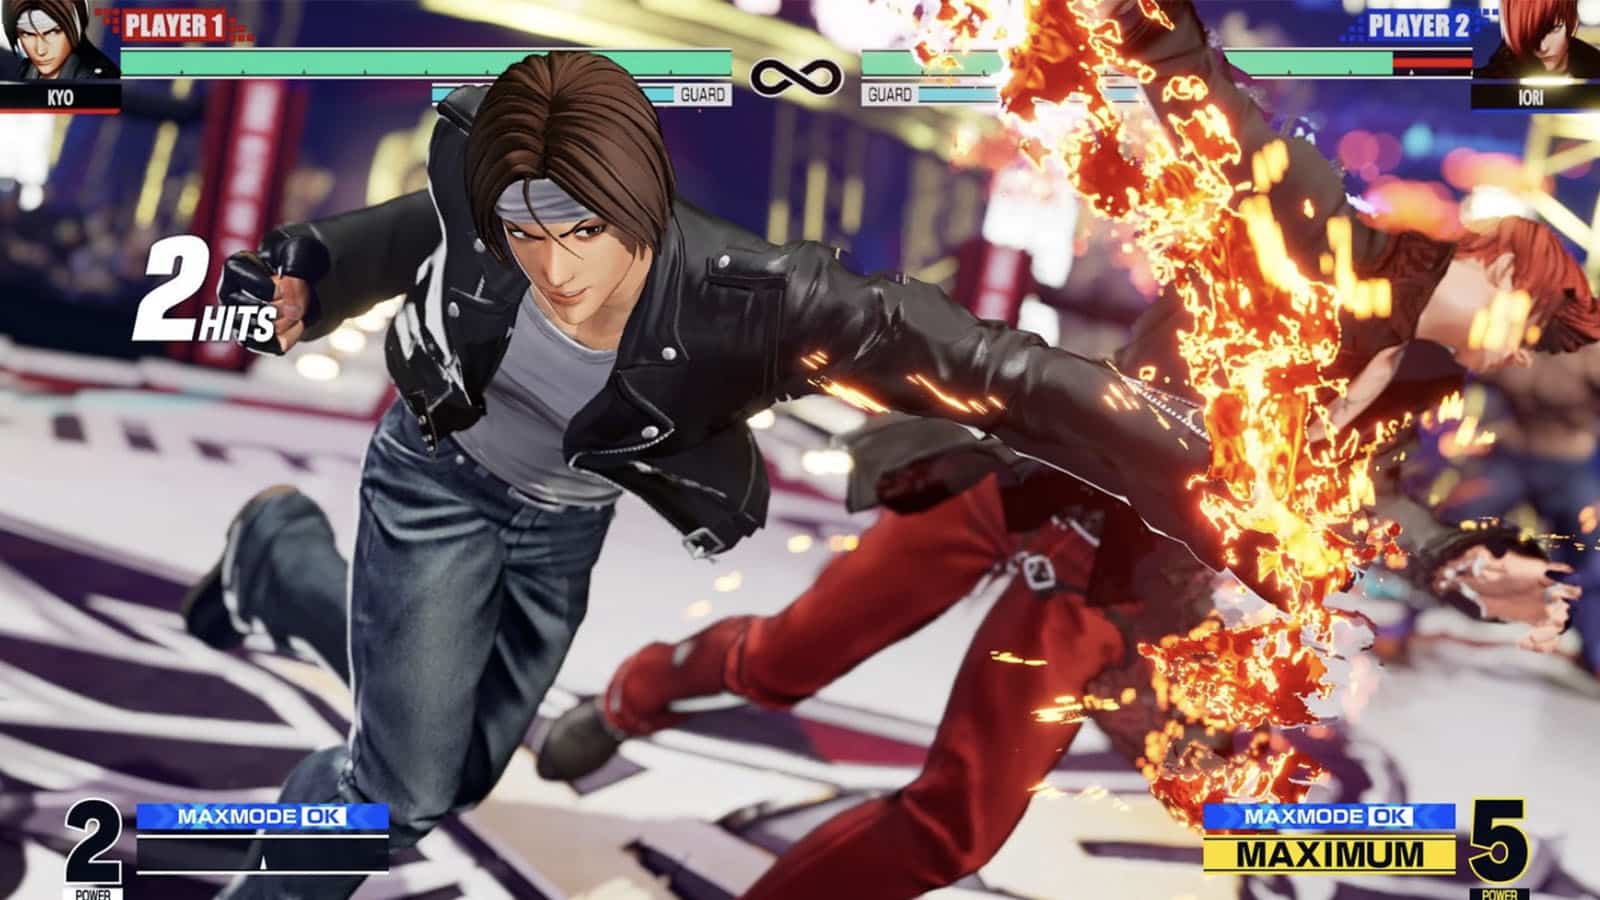 Kyo in King of Fighters